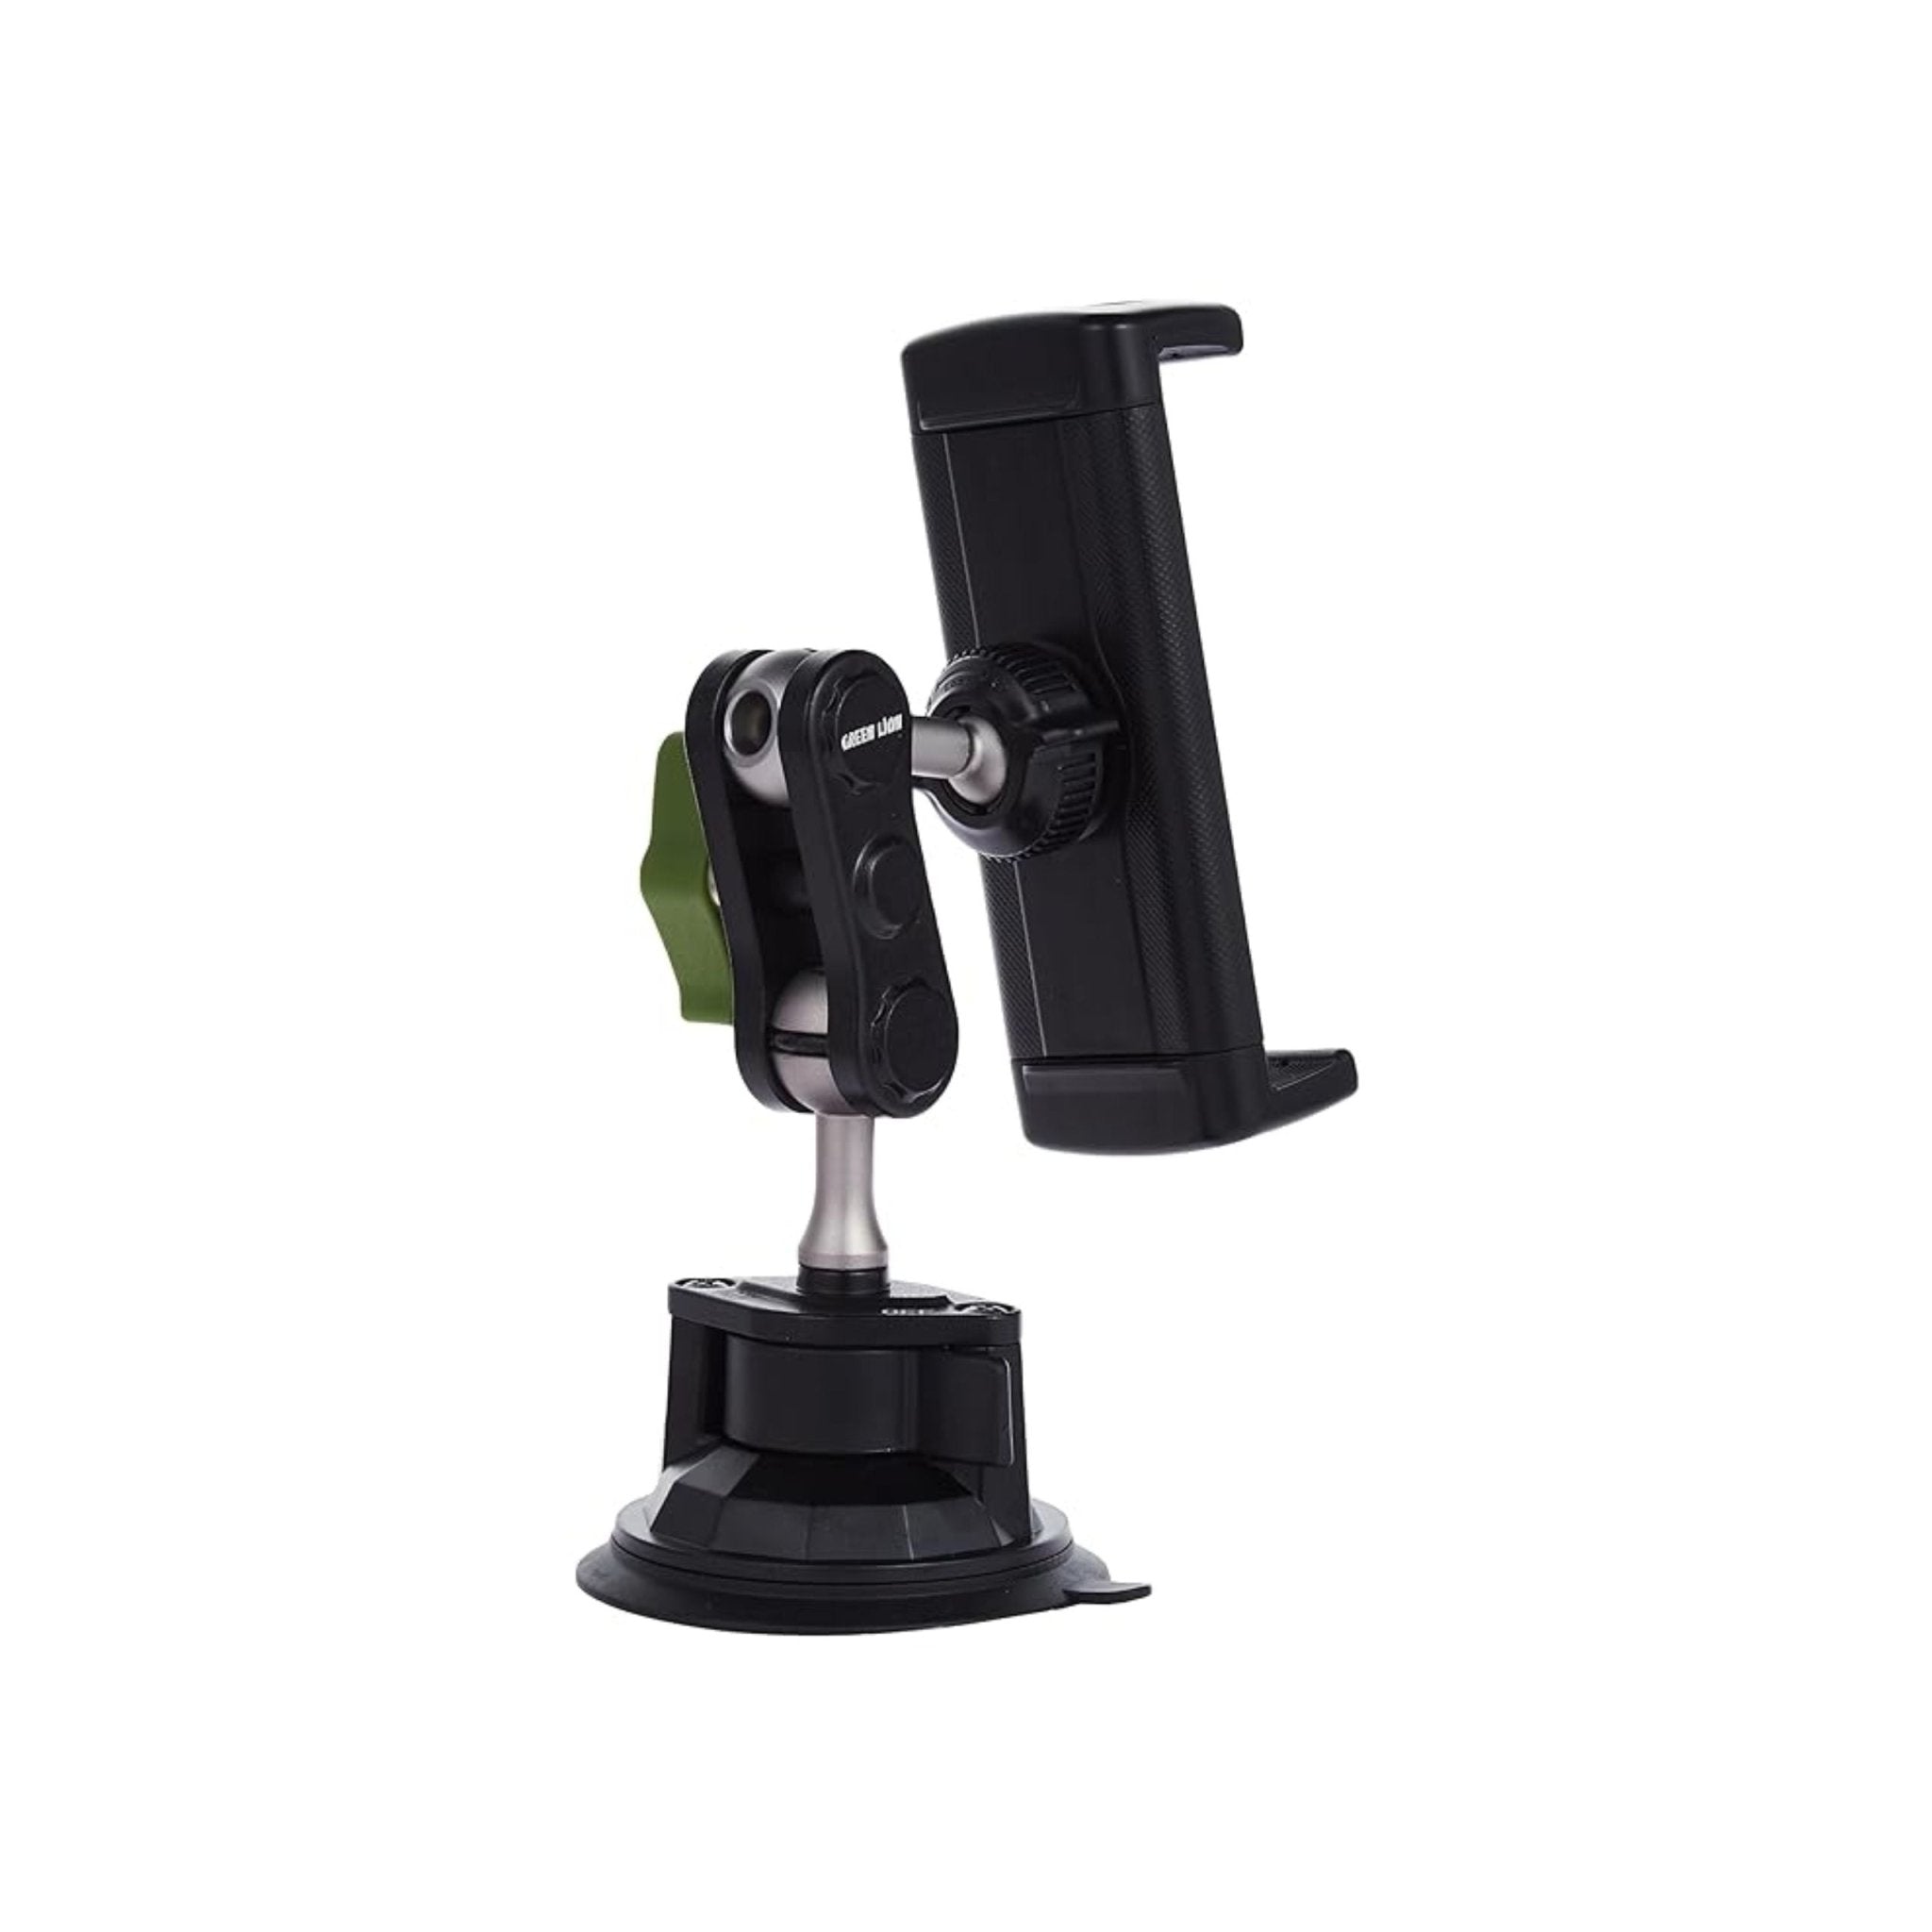 Green Lion Ultimate Tablet Holder With Suction Cup Mount - Black